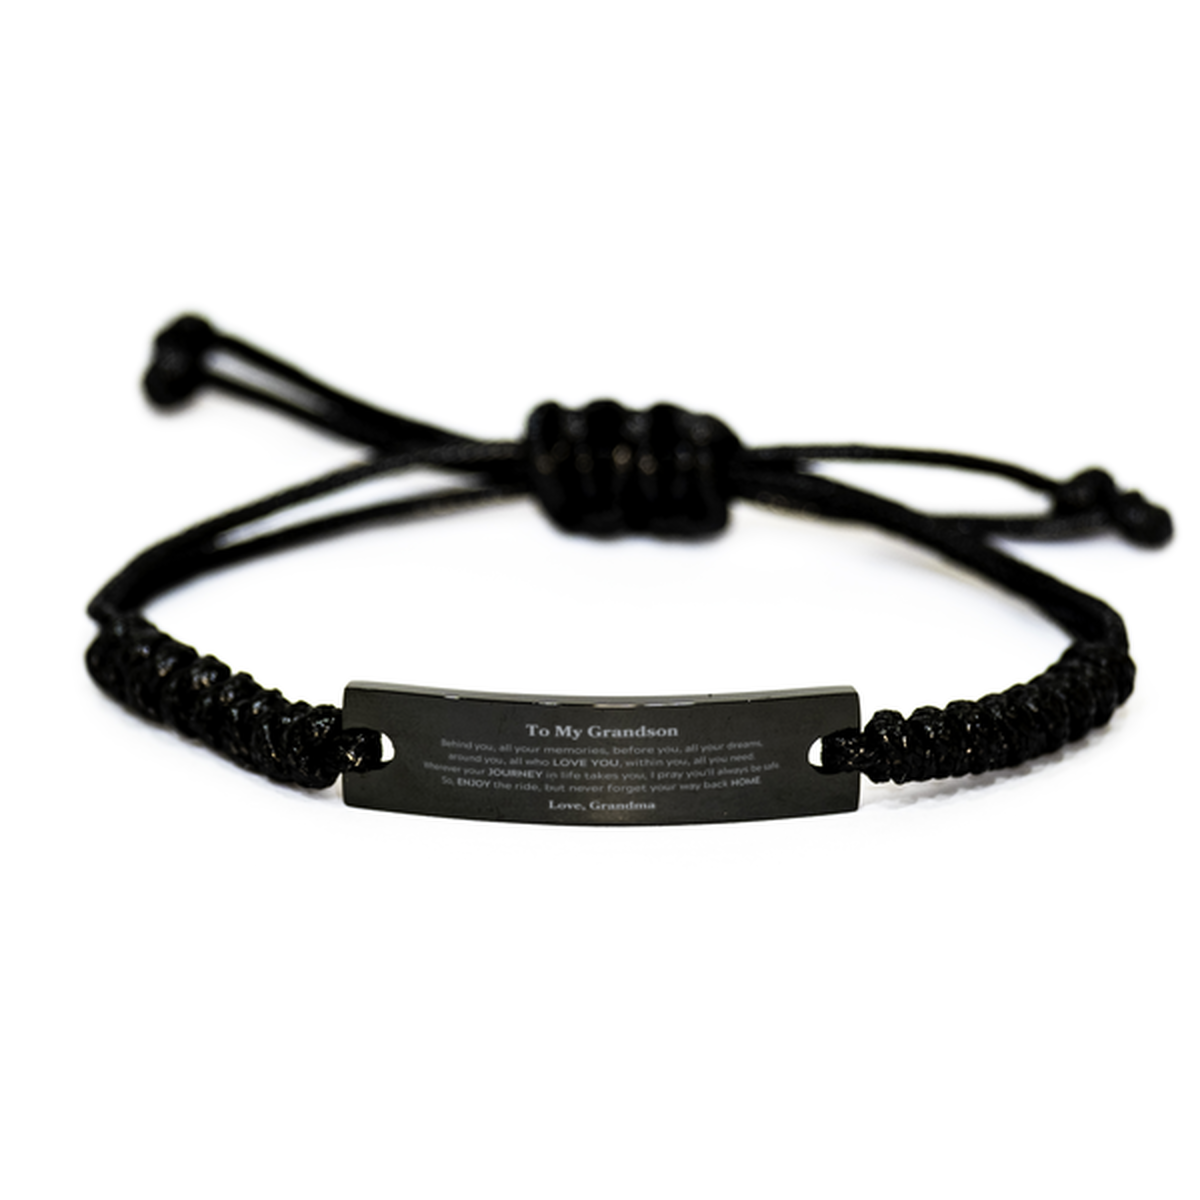 To My Grandson Graduation Gifts from Grandma, Grandson Black Rope Bracelet Christmas Birthday Gifts for Grandson Behind you, all your memories, before you, all your dreams. Love, Grandma